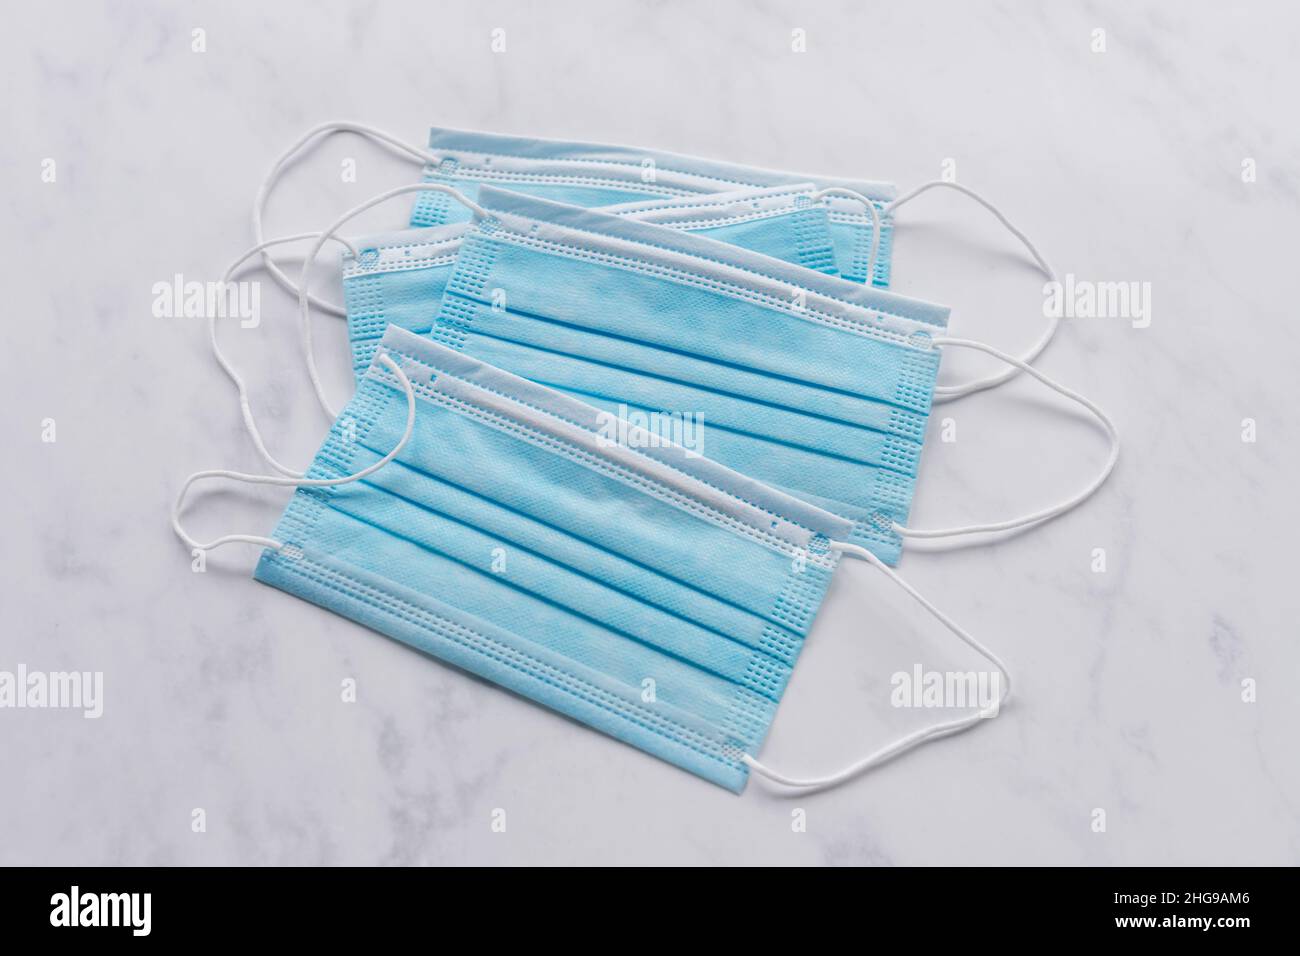 Four single use disposable blue face masks on white marble Stock Photo